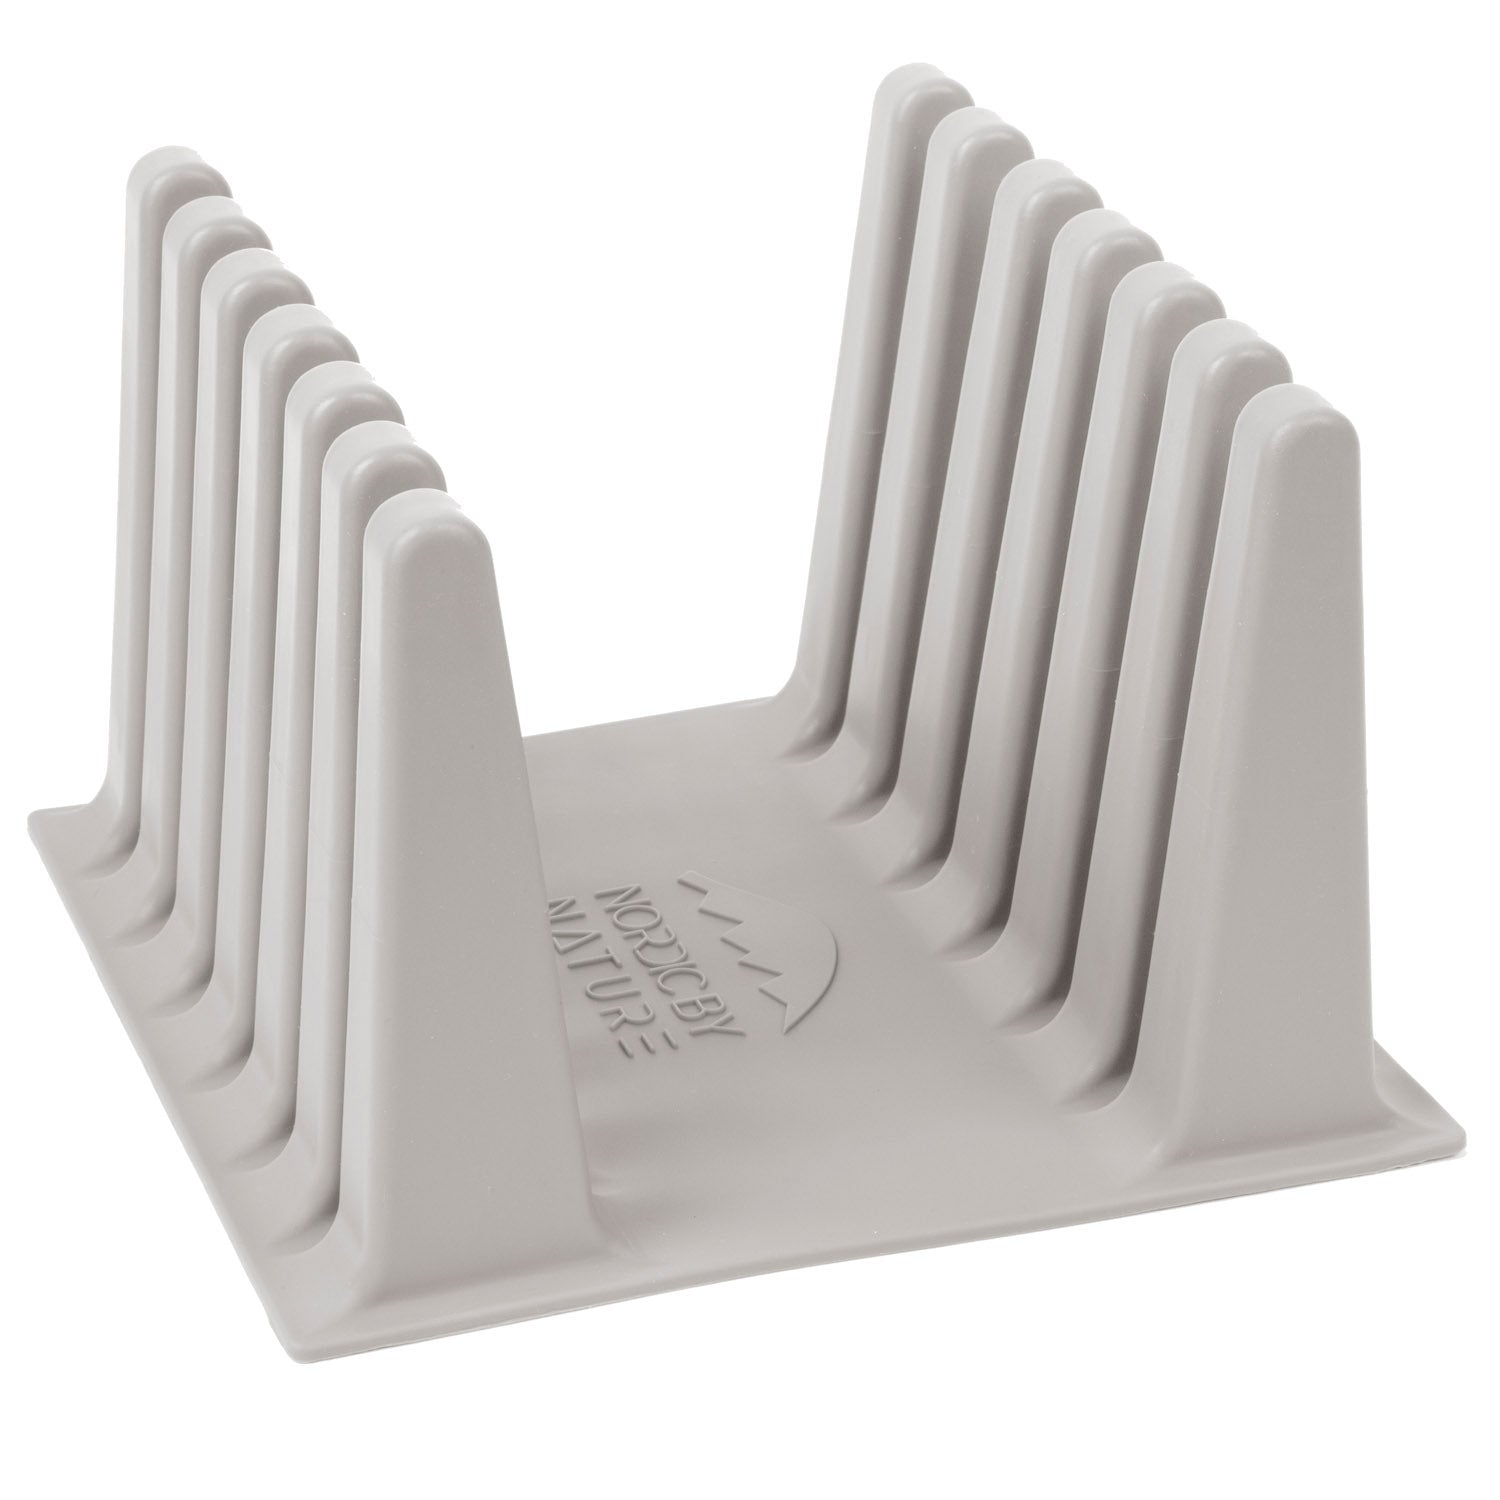 Nordic By Nature Silicone Drying Rack For Reusable Bags - (Light Grey)